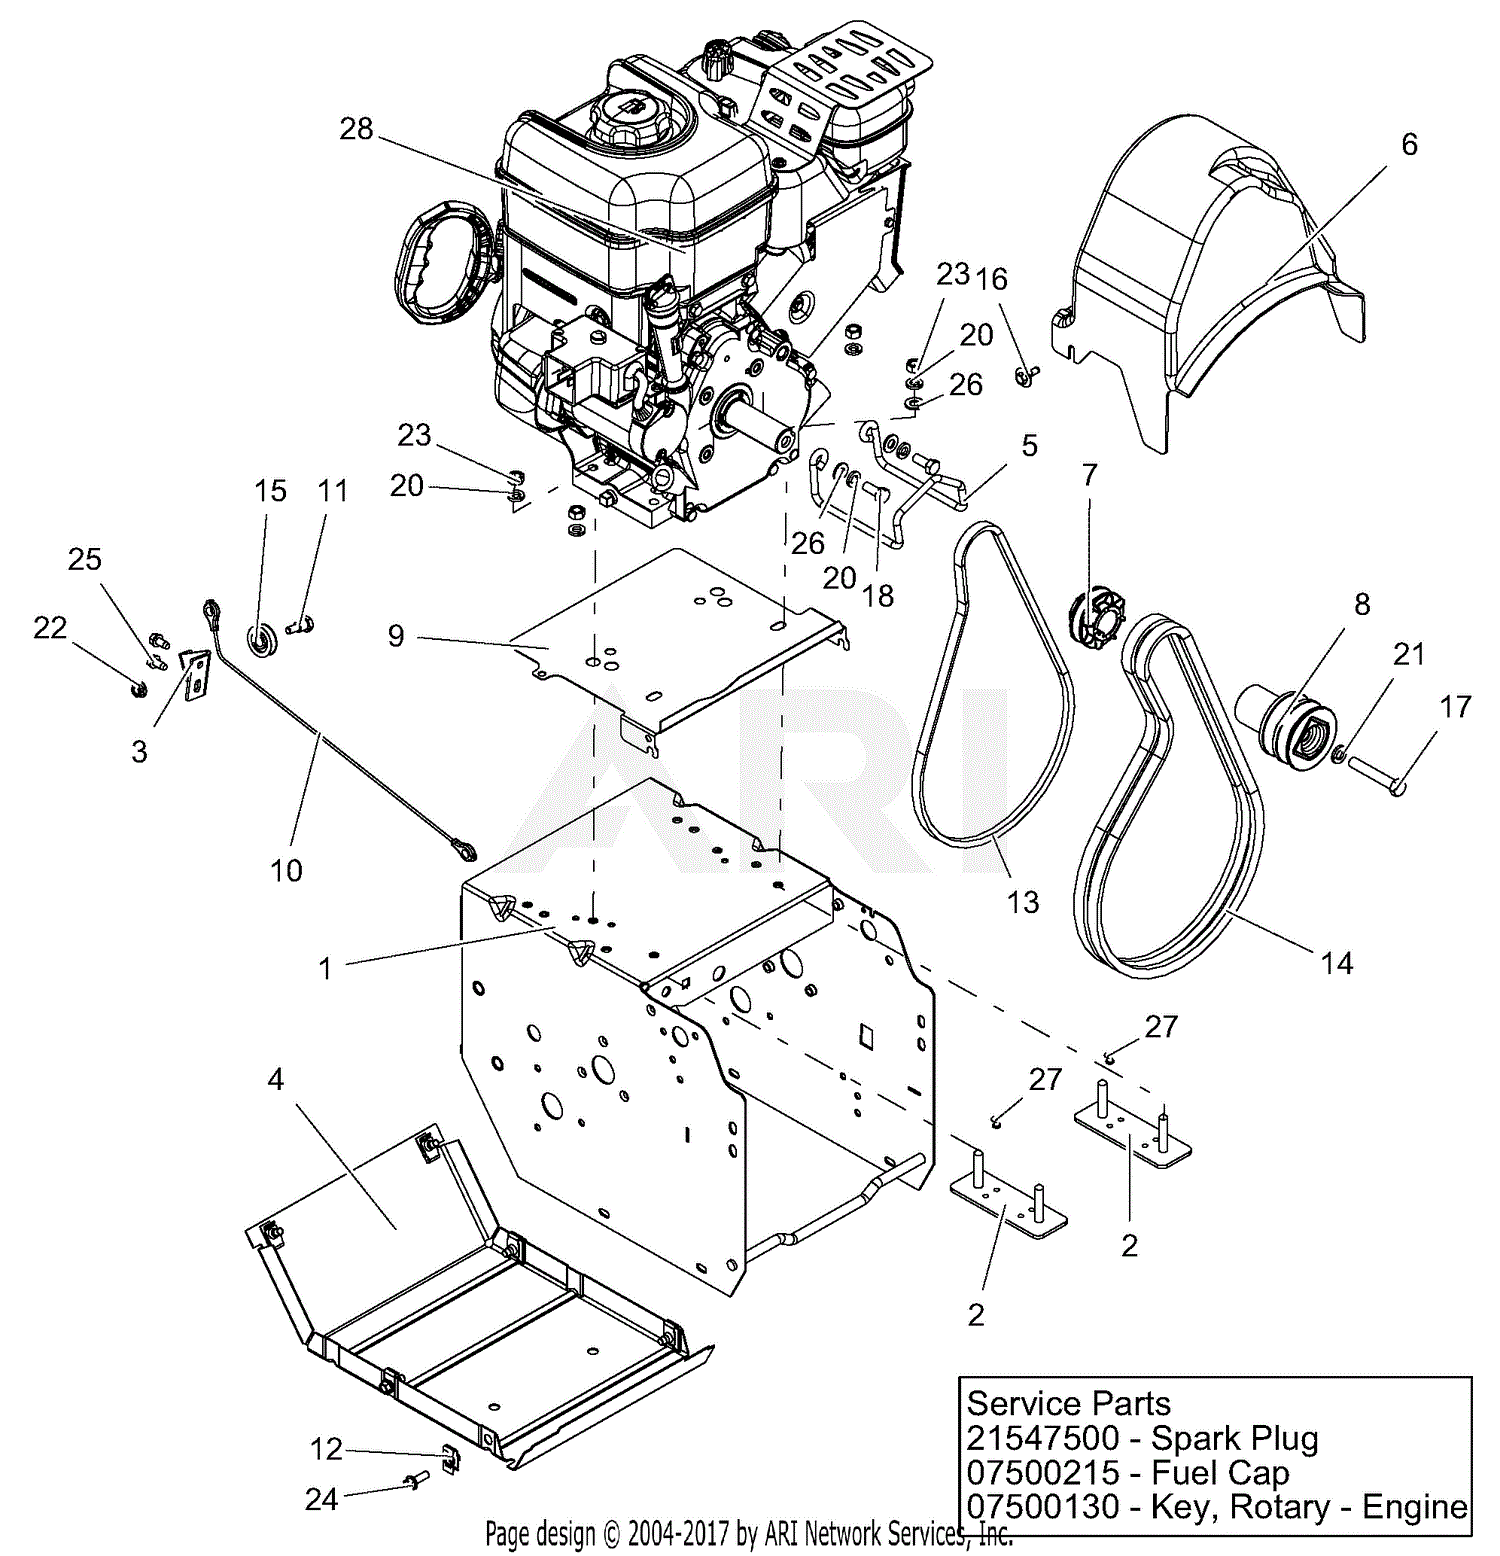 Ariens 921035 (000101 - ) Deluxe 28" Parts Diagram for Engine, Frame